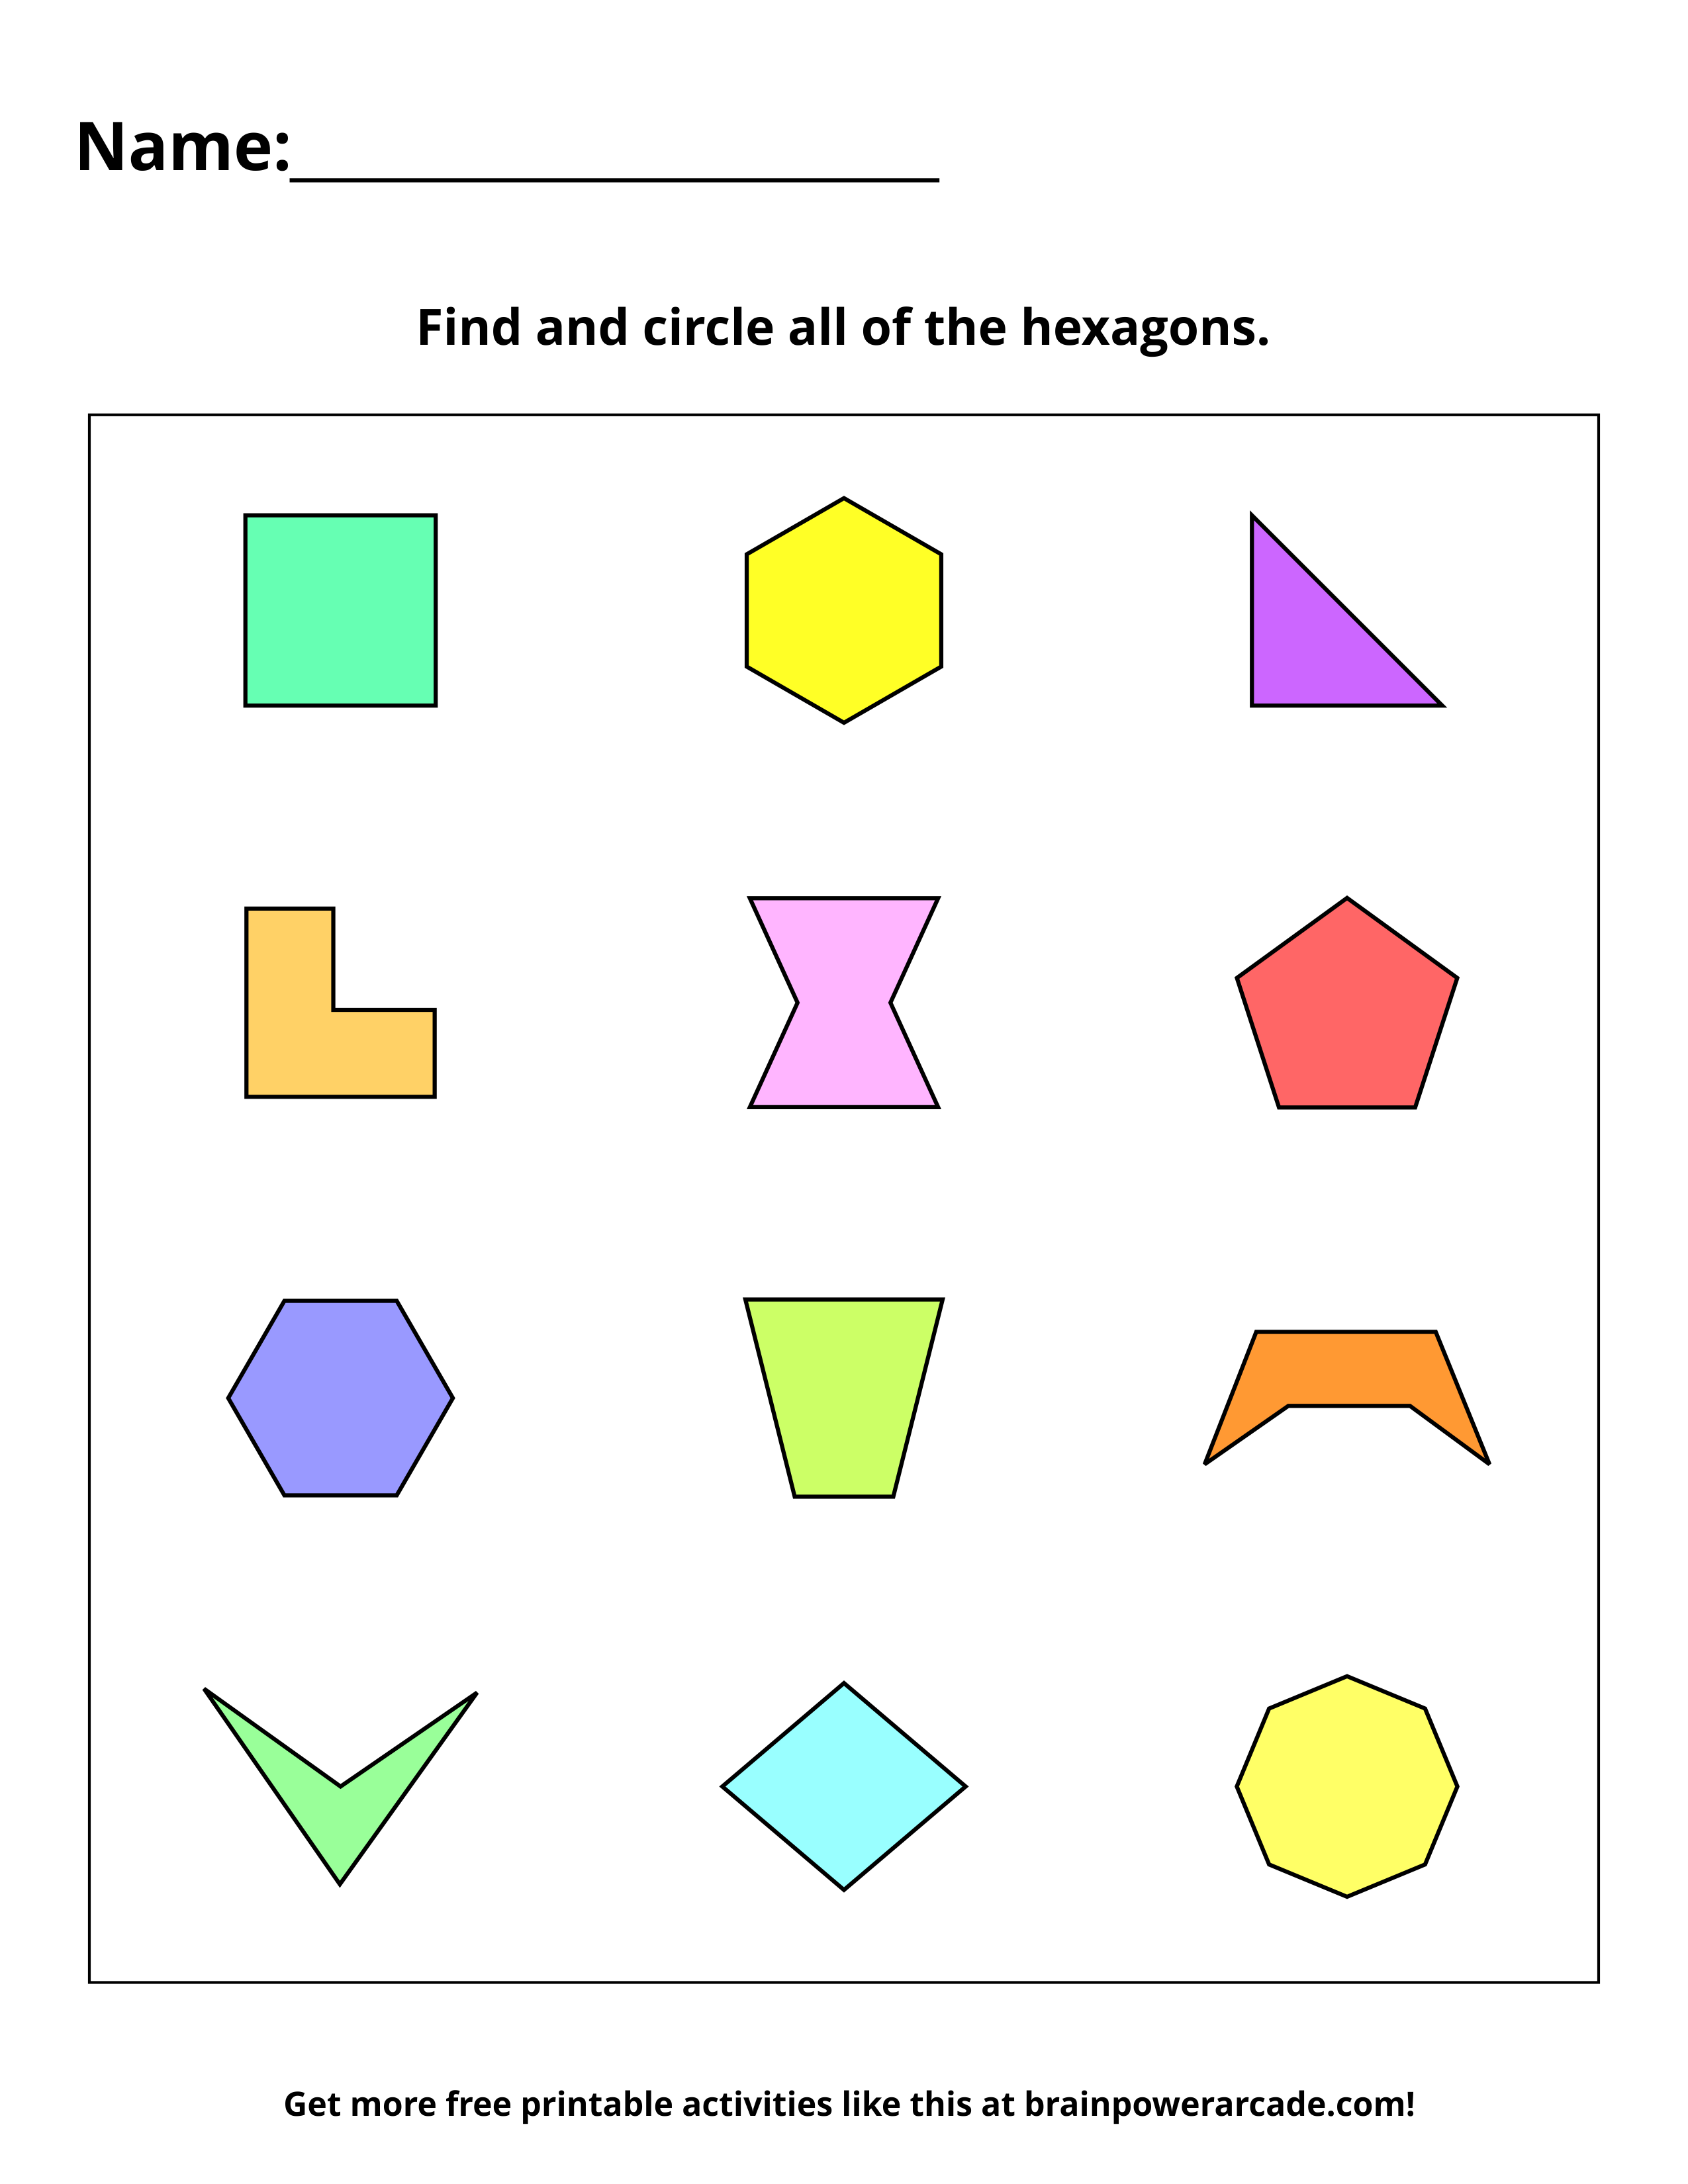 Find and Circle Hexagons